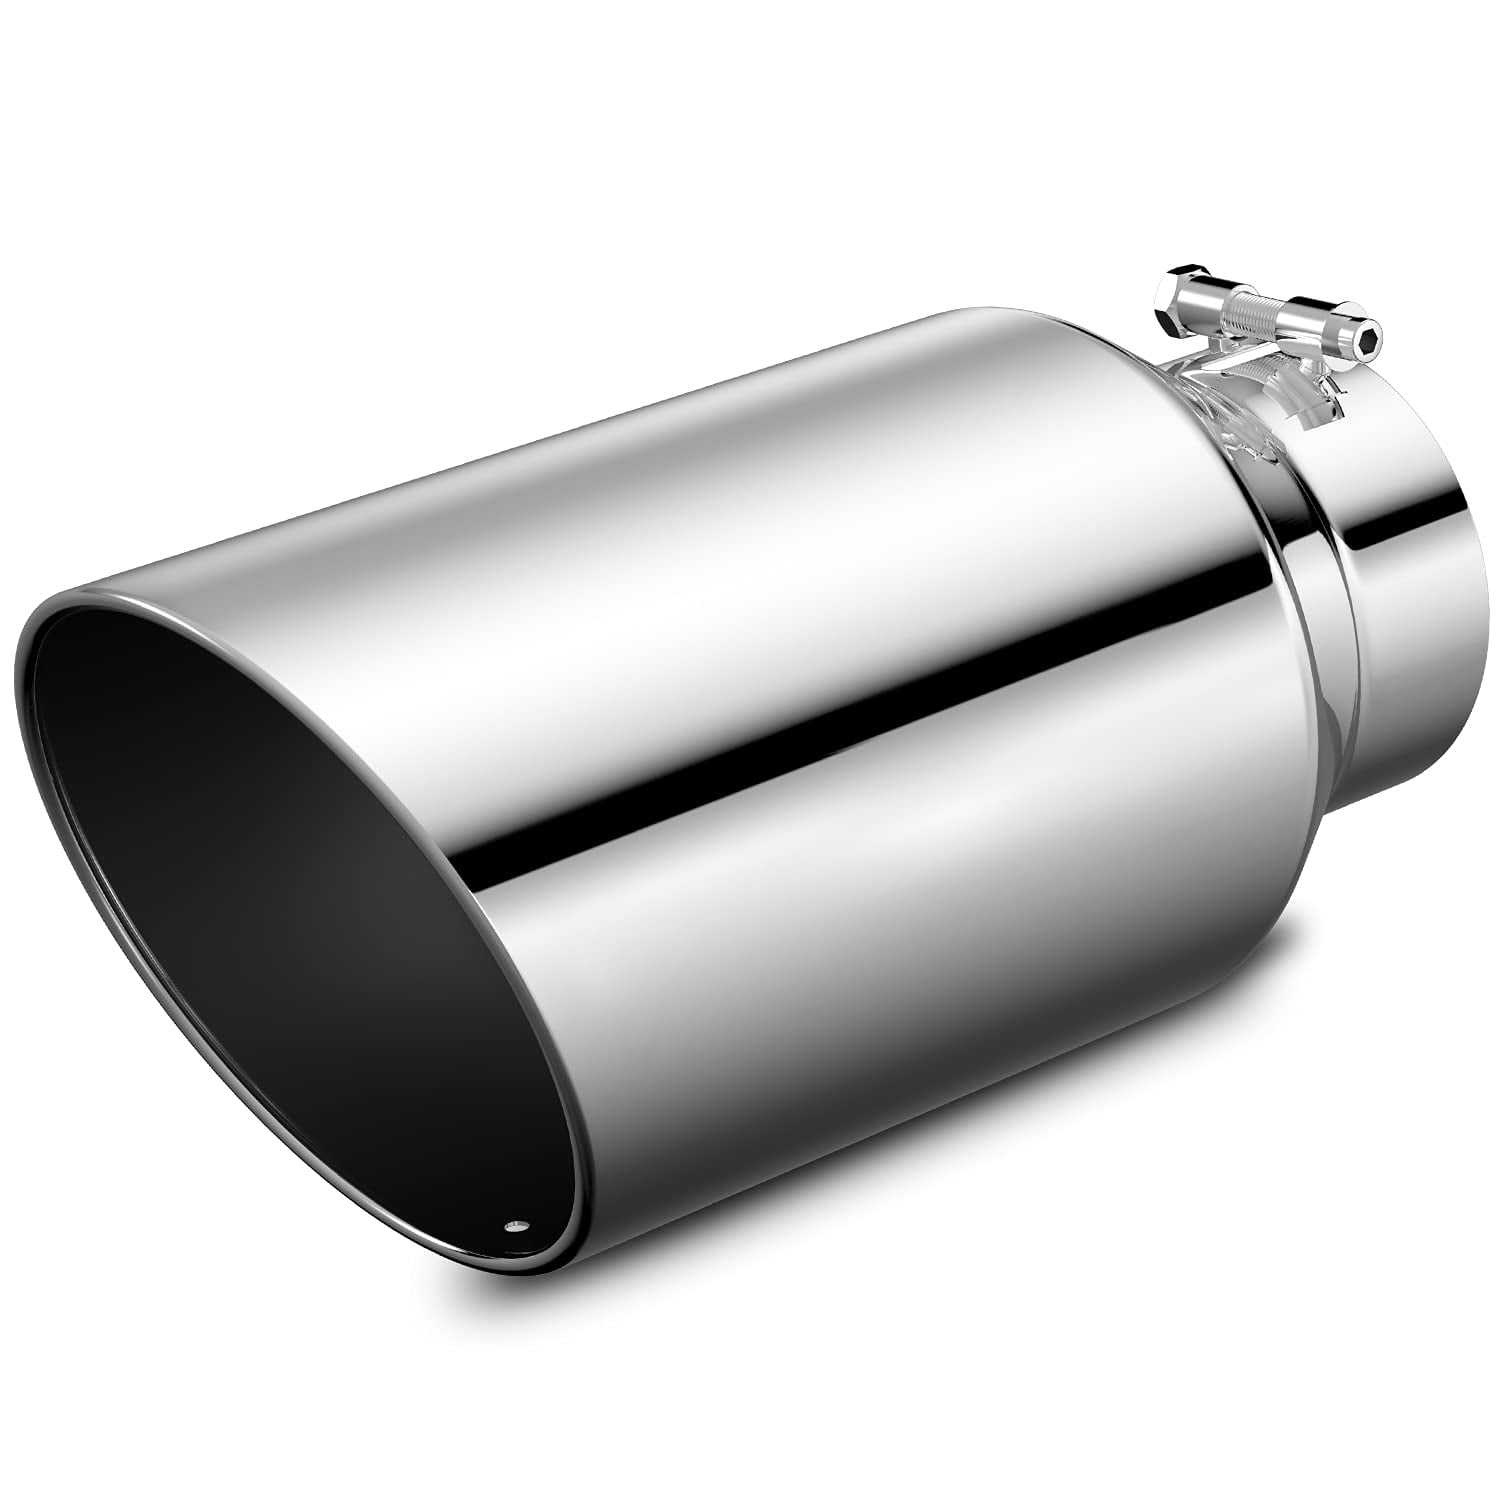 4 Inch Inlet Exhaust Tip LCGP 4 Inlet x 5 Outlet x 12 Overall Length Clamp On Universal Stainless Steel Polished Diesel Exhaust Tailpipe Tip